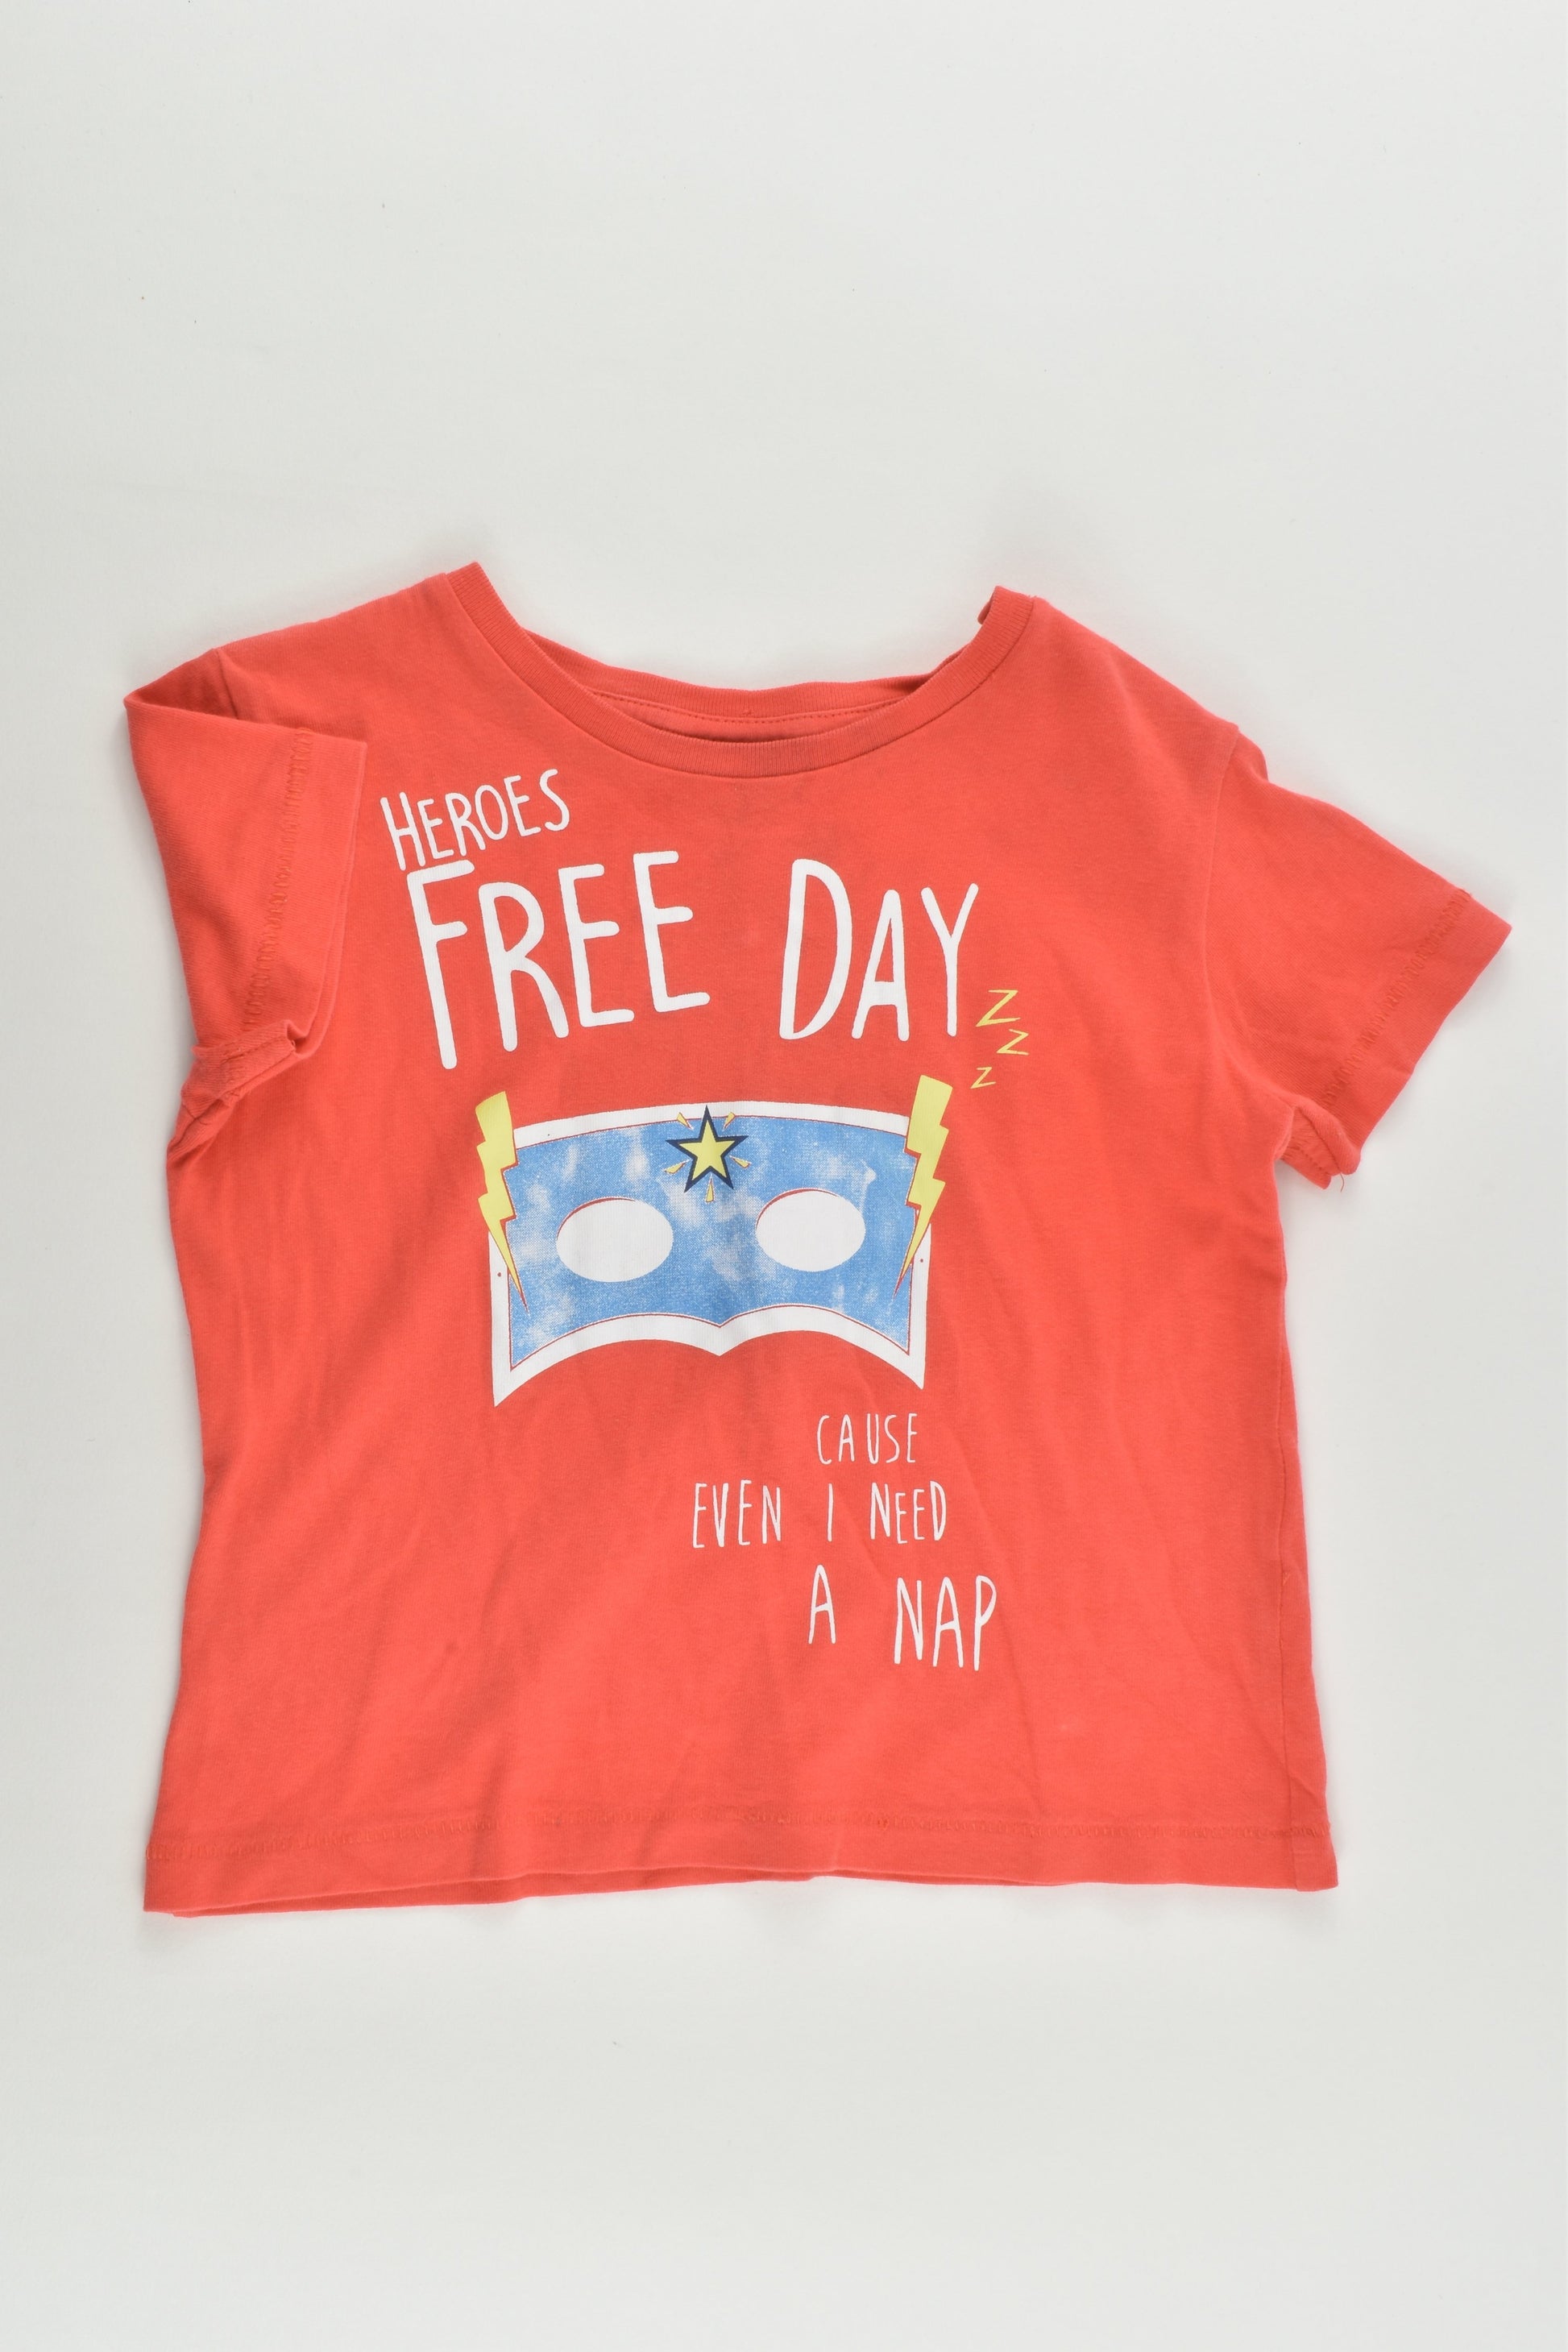 Zara Size 1 (12/18 months, 86 cm) 'Heroes Free Day' T-shirt